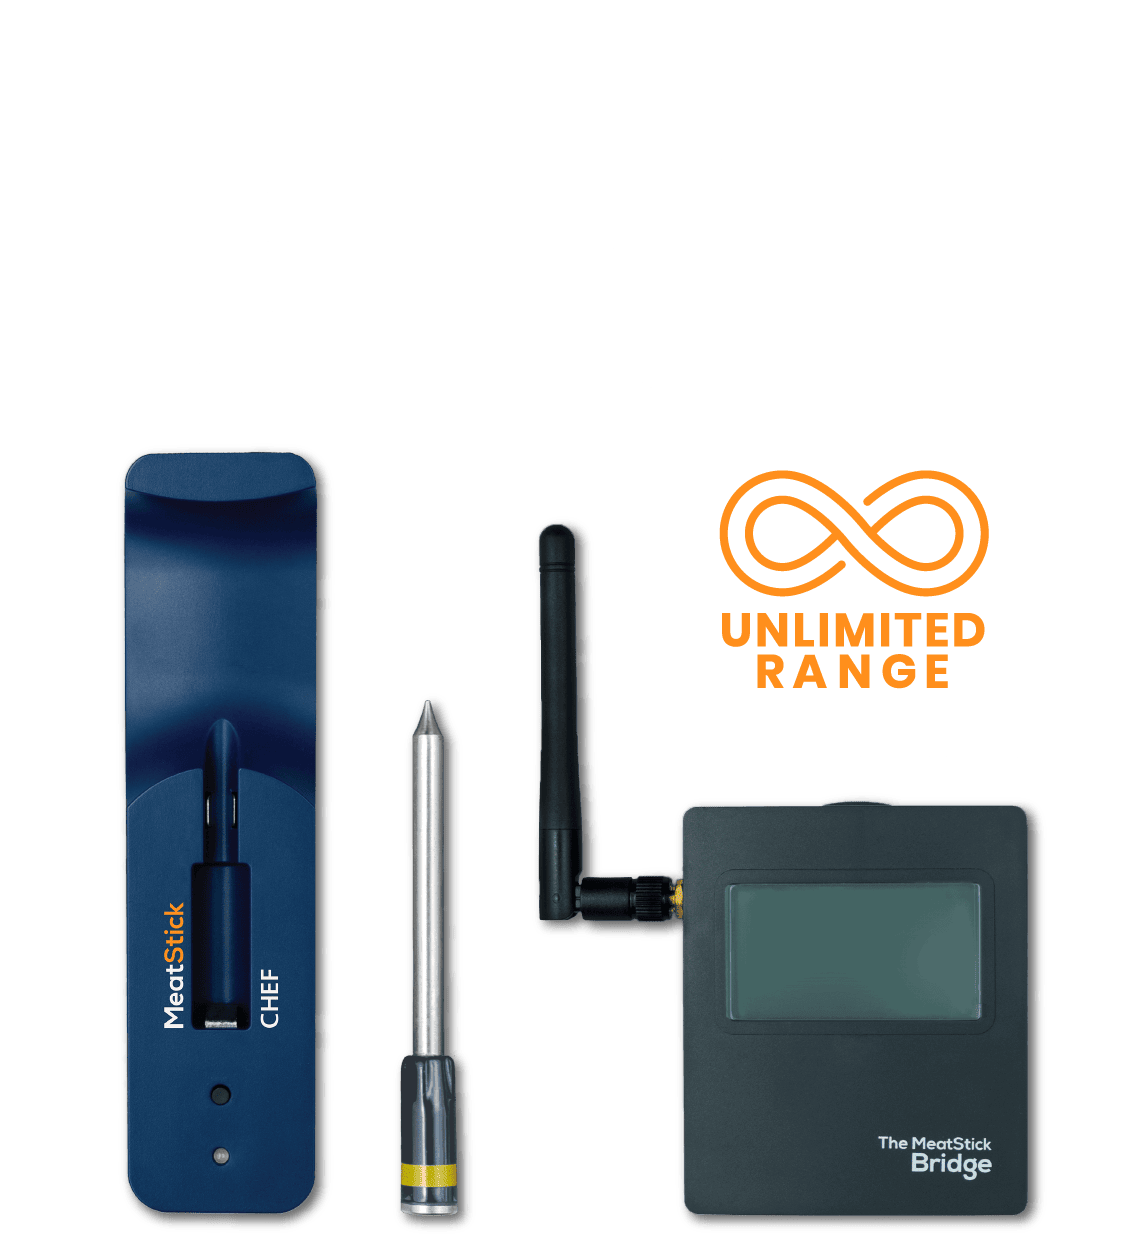 The MeatStick Chef: The Smallest Wireless Meat Thermometer for Small Meat Cuts and Everyday Cooking with Unlimited Range WiFi Bridge